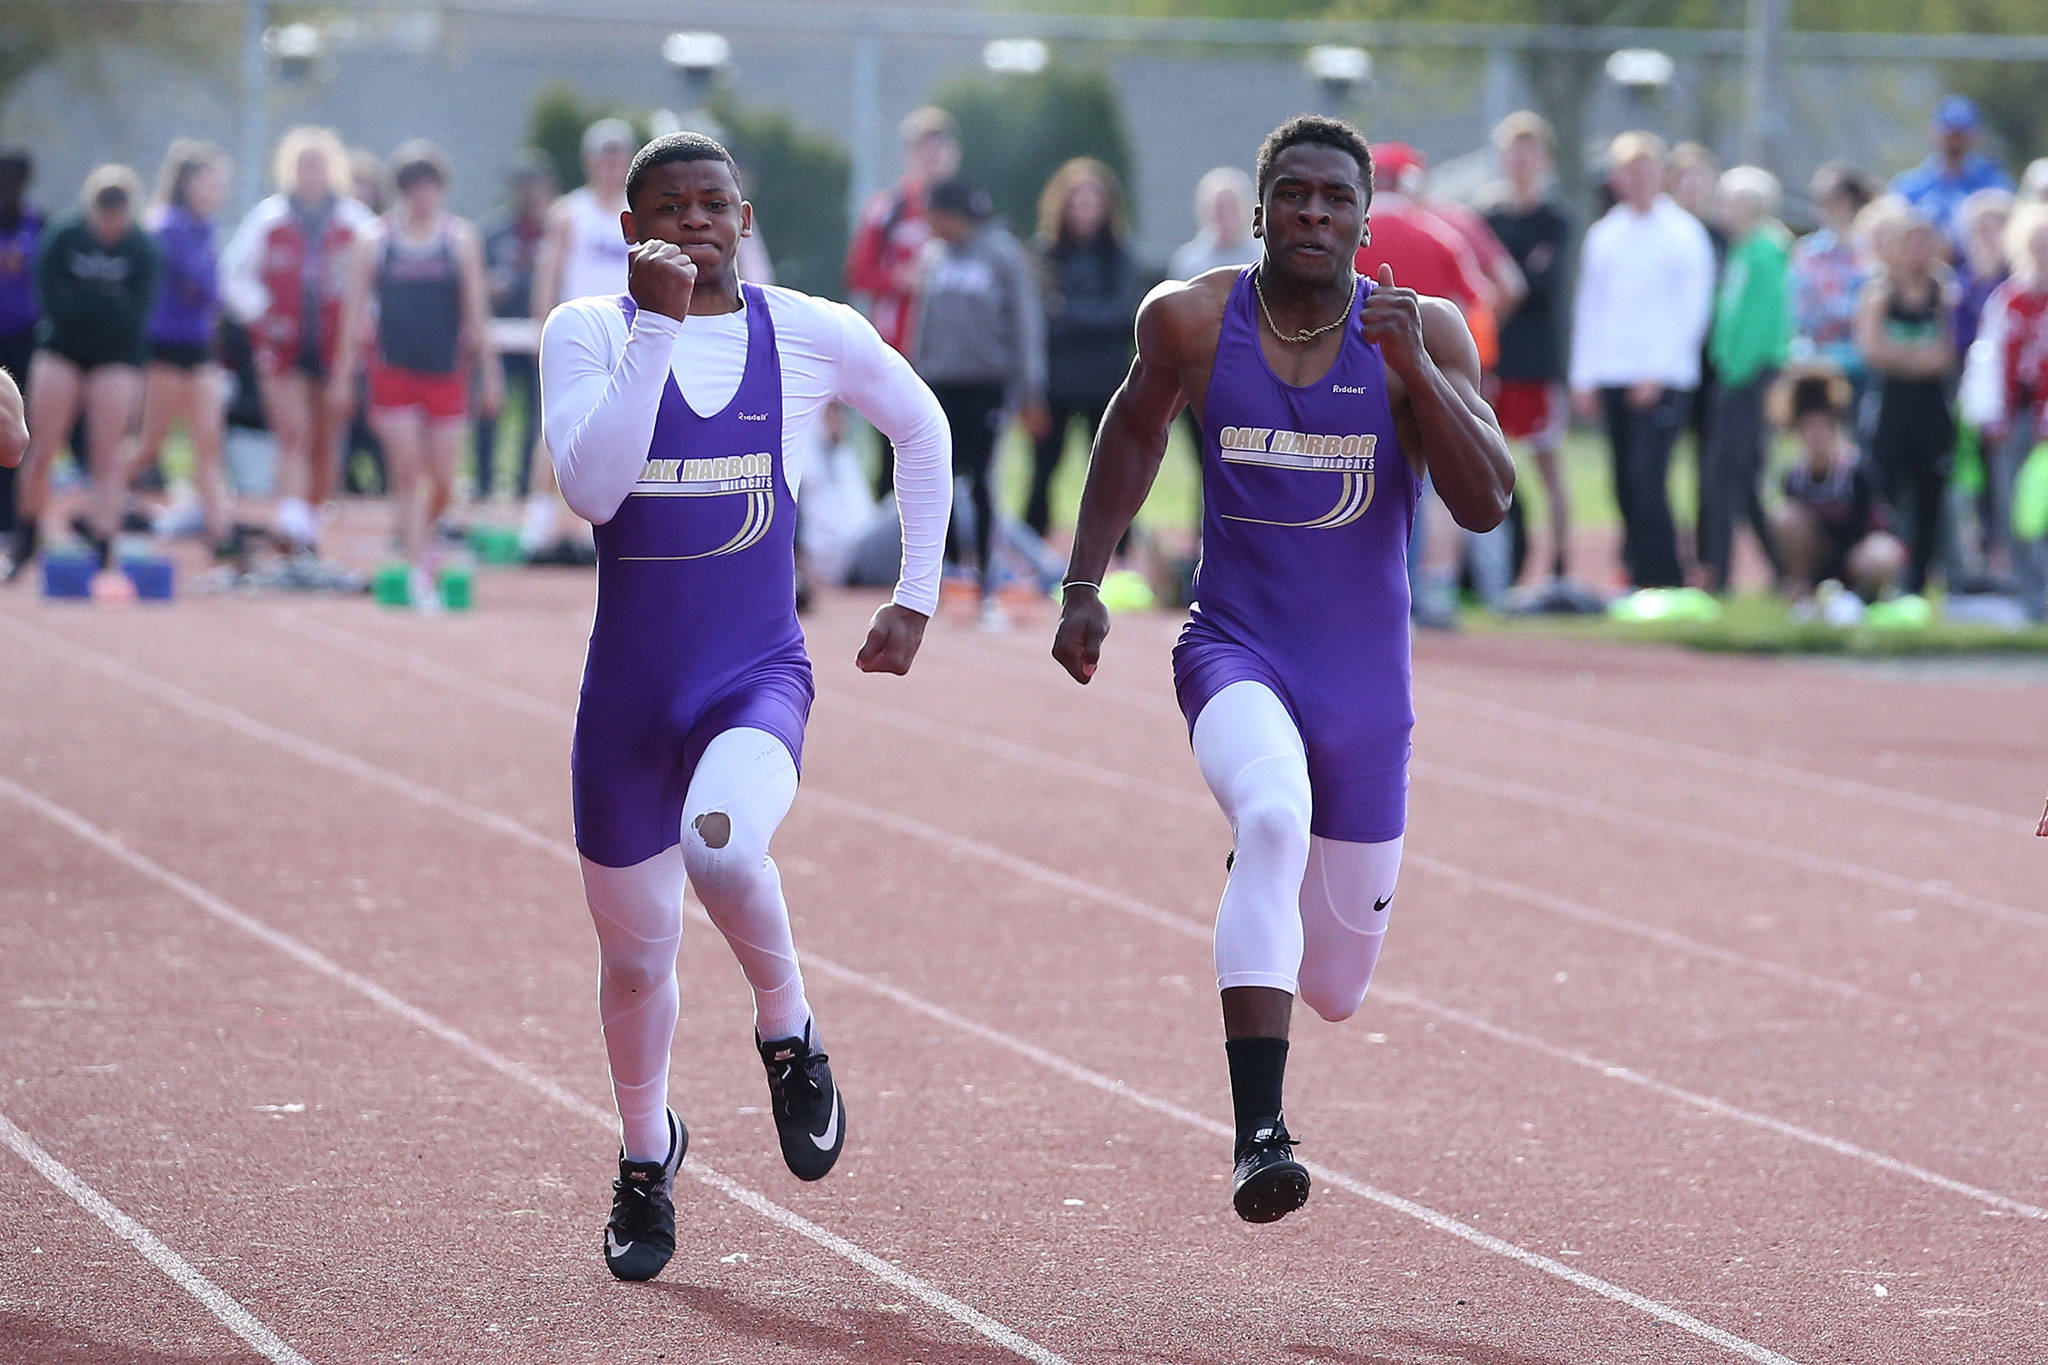 The Hardin brothers, Dorian, left, and Taeson, run the 100 meters at the Stanwood Twilight Invitational Friday.(Photo by John Fisken)